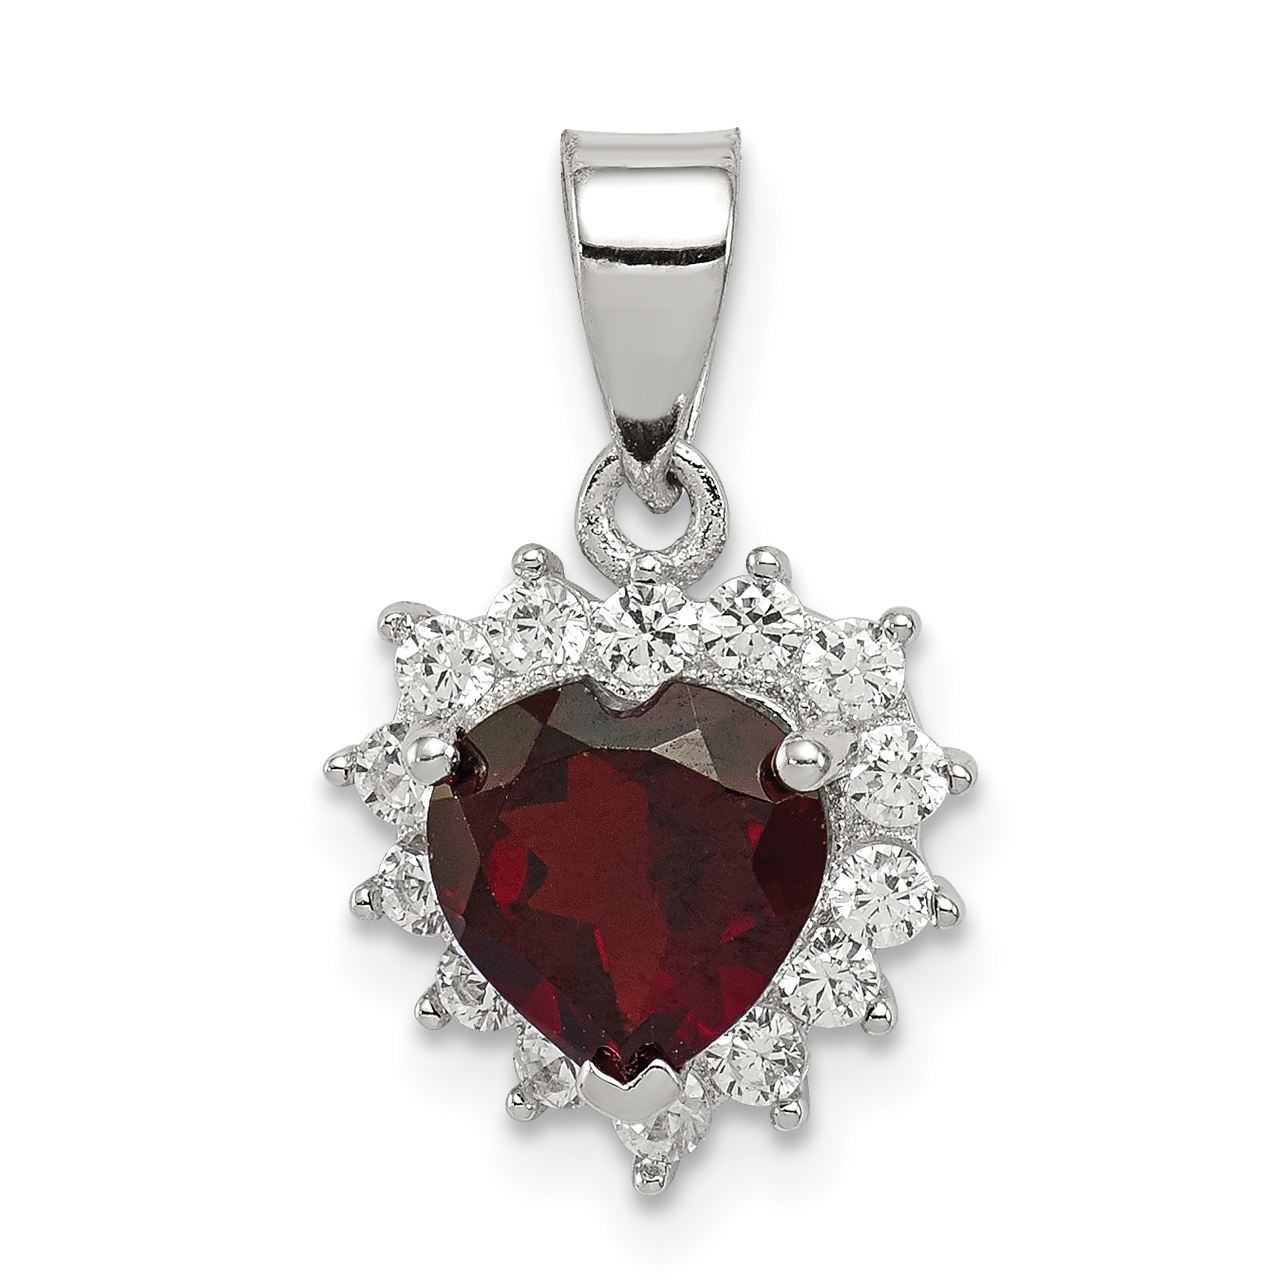 Solid 925 Sterling Silver Garnet January Red Gemstone and CZ Cubic Zirconia 